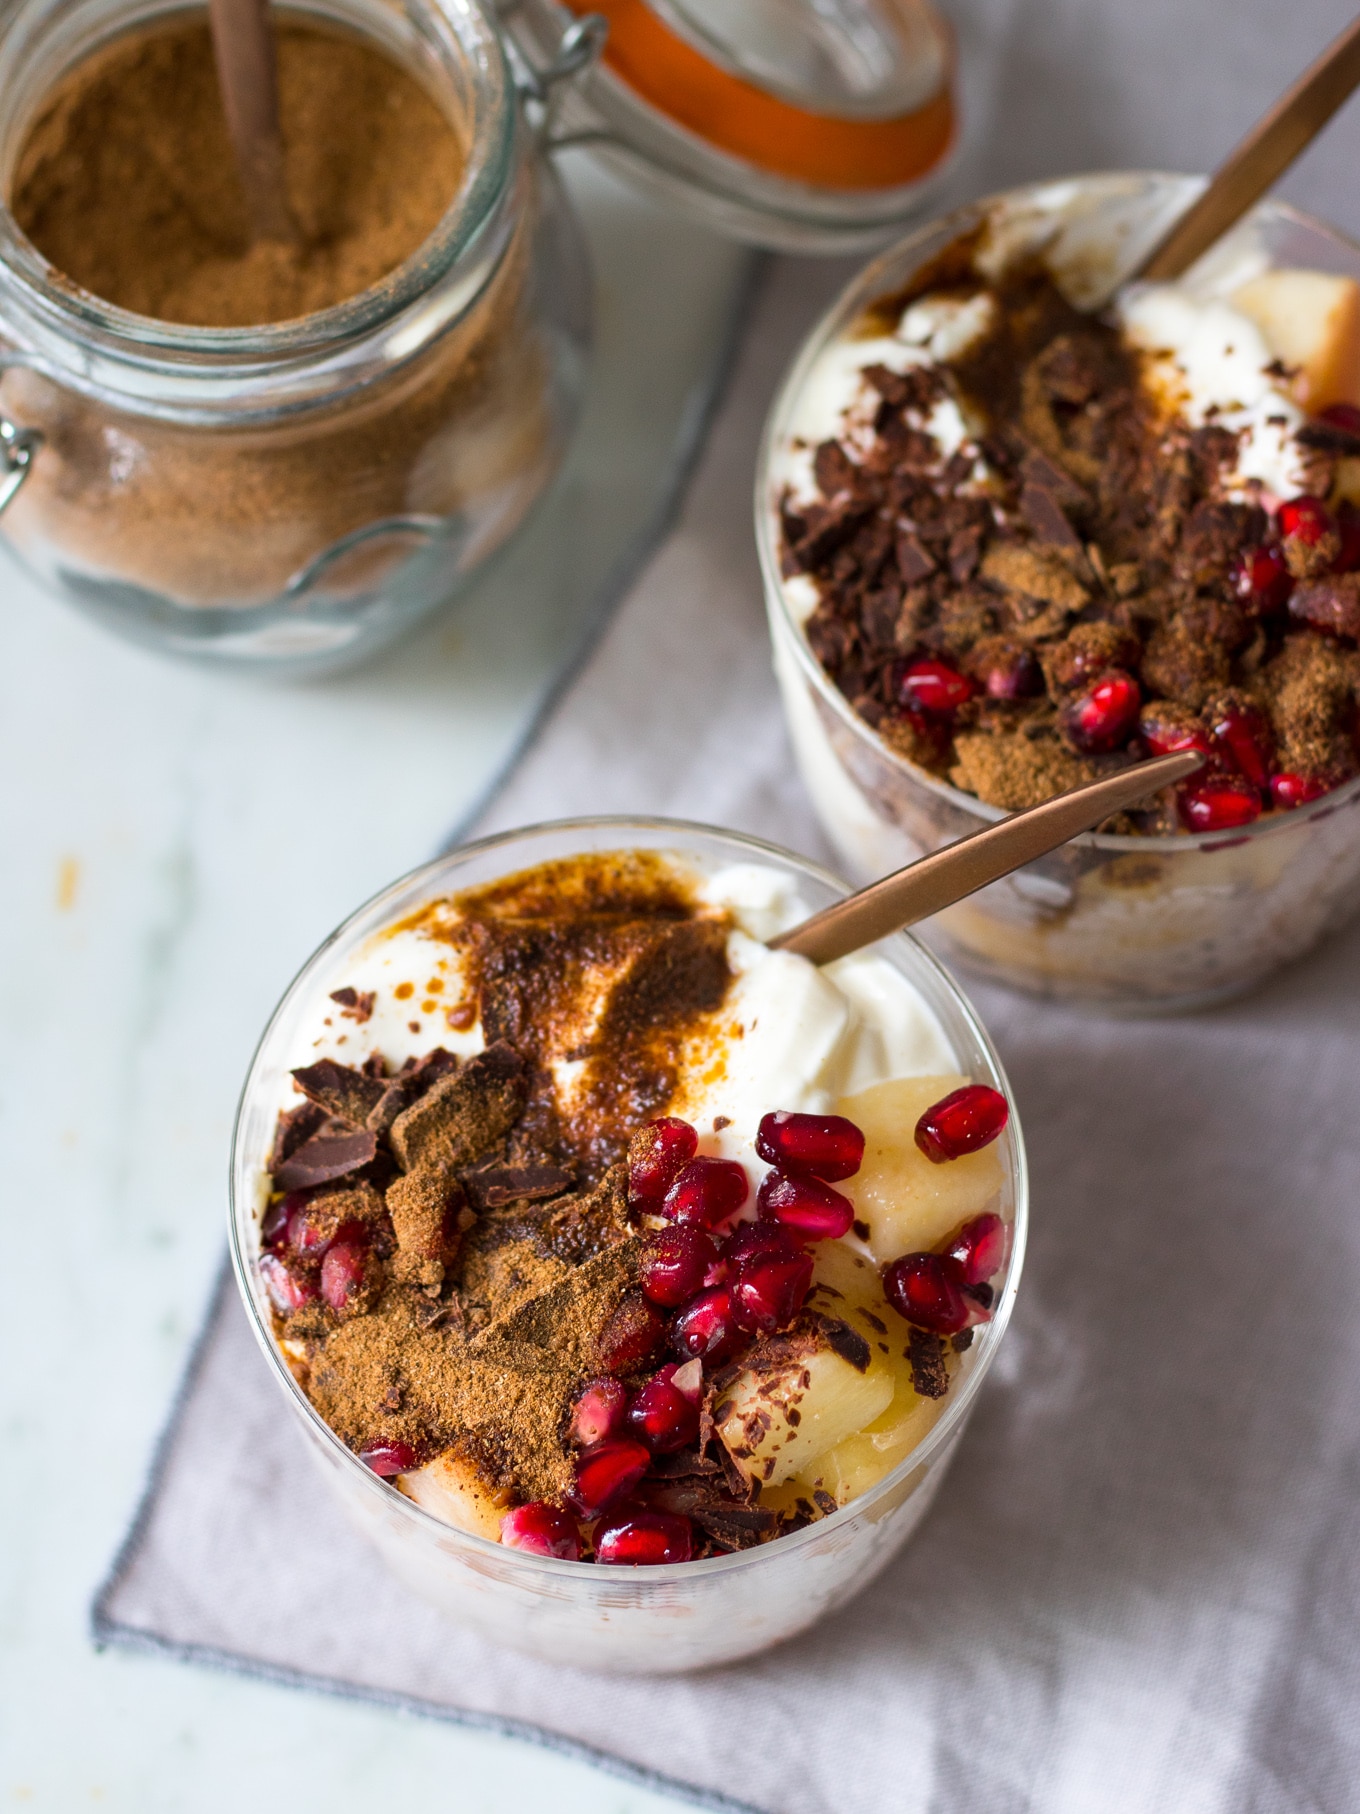 Chai Yoghurt Dessert Pots made with DIY chai latte mix! Juicy fruit, creamy yoghurt (dairy or coconut), grated chocolate and chai spices. So easy, healthy and yet decadent.